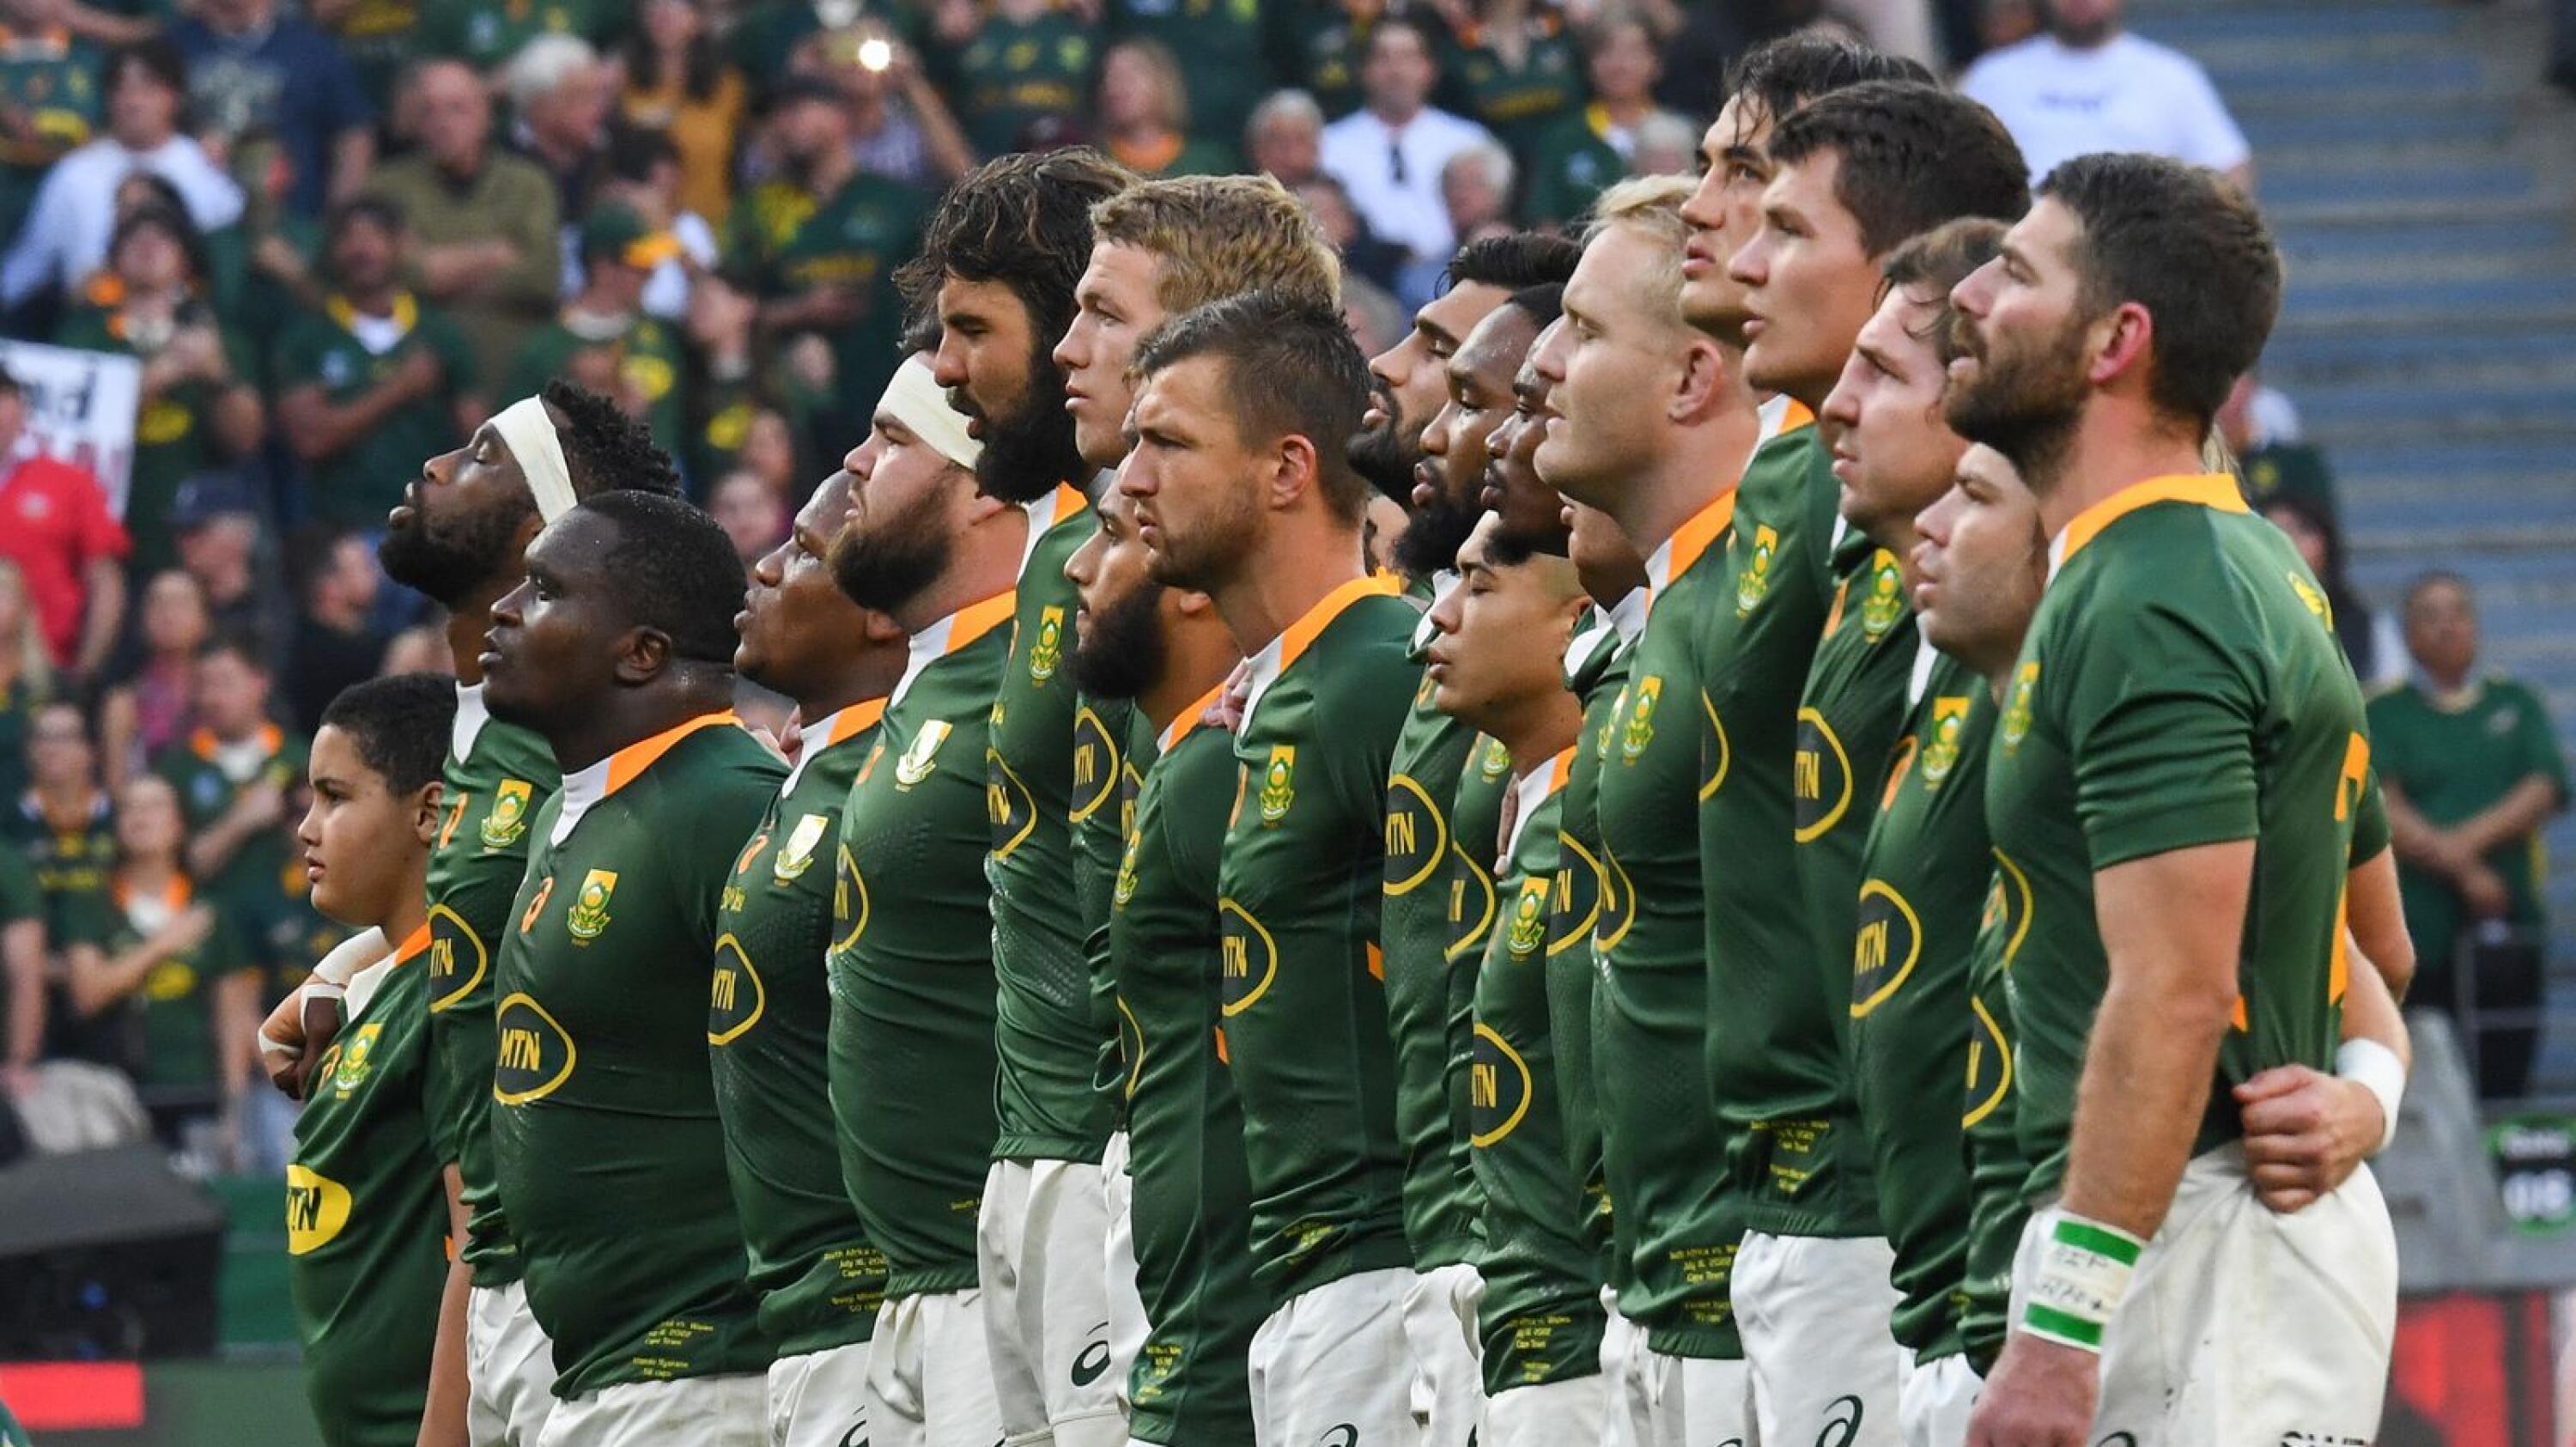 South African rugby players sing their national anthem ahead of the third Test against Wales at Cape Town Stadium in Cape Town on Saturday